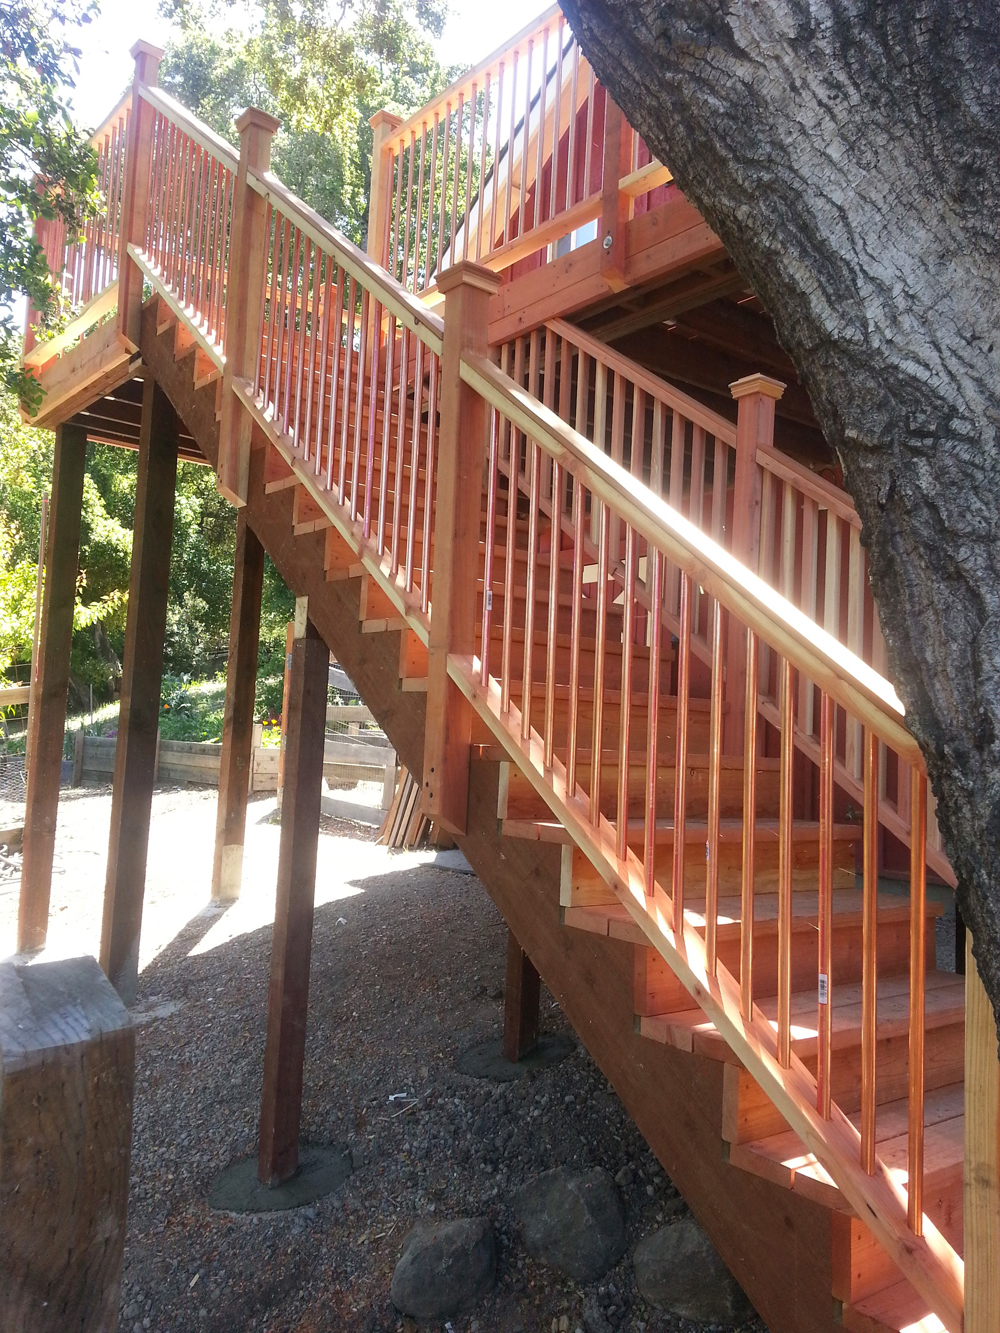 Cedar-brown wooden staircase with light brown wooden railings leading up to an enclosed second-floor deck area